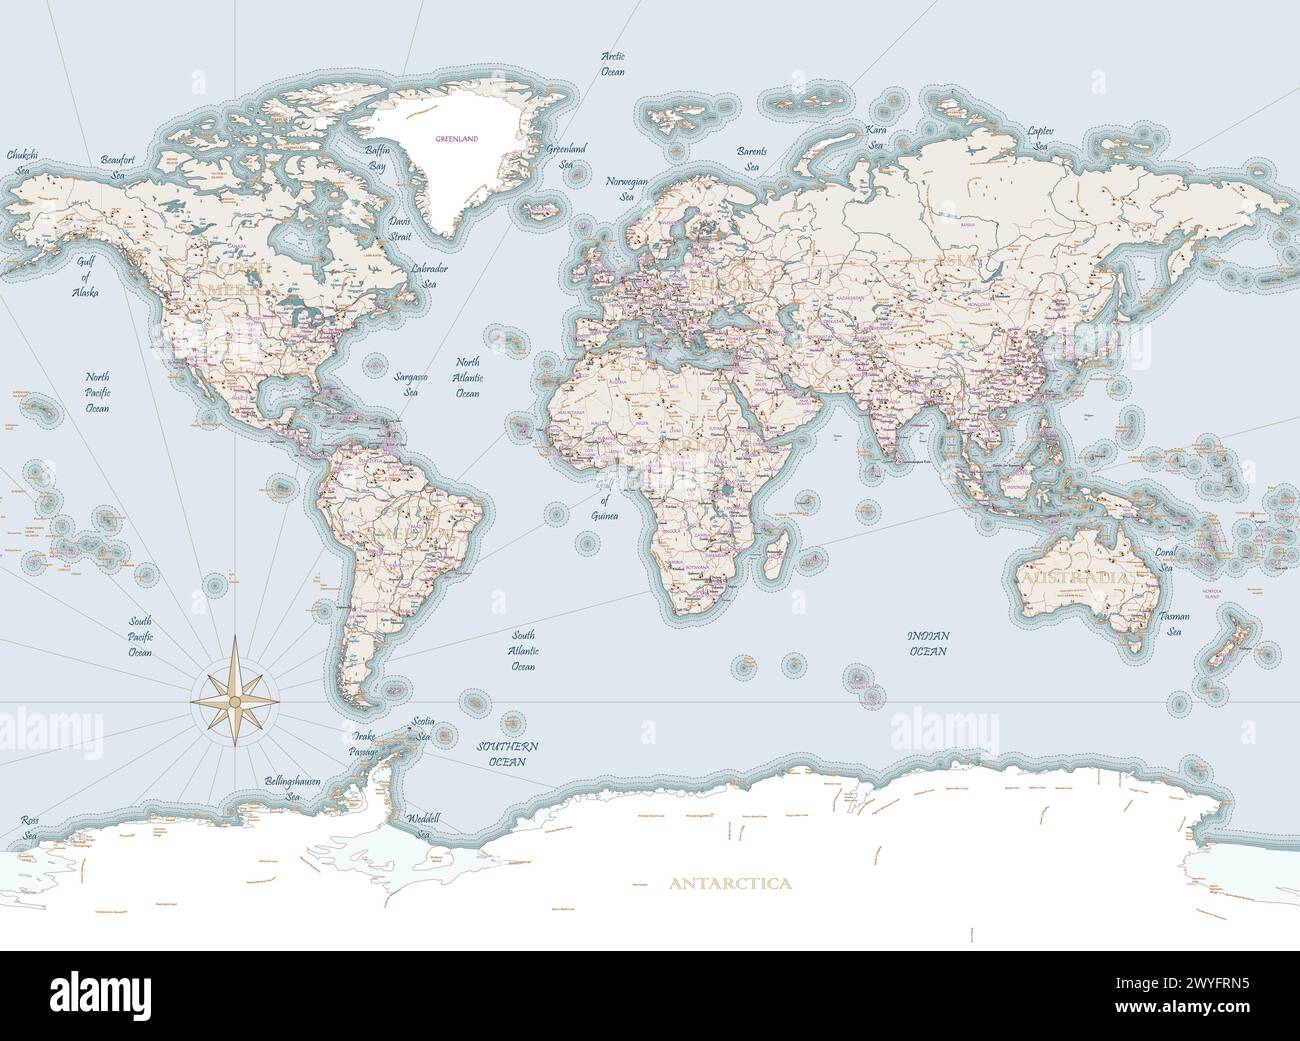 World map pirate vintage style Stock Vector